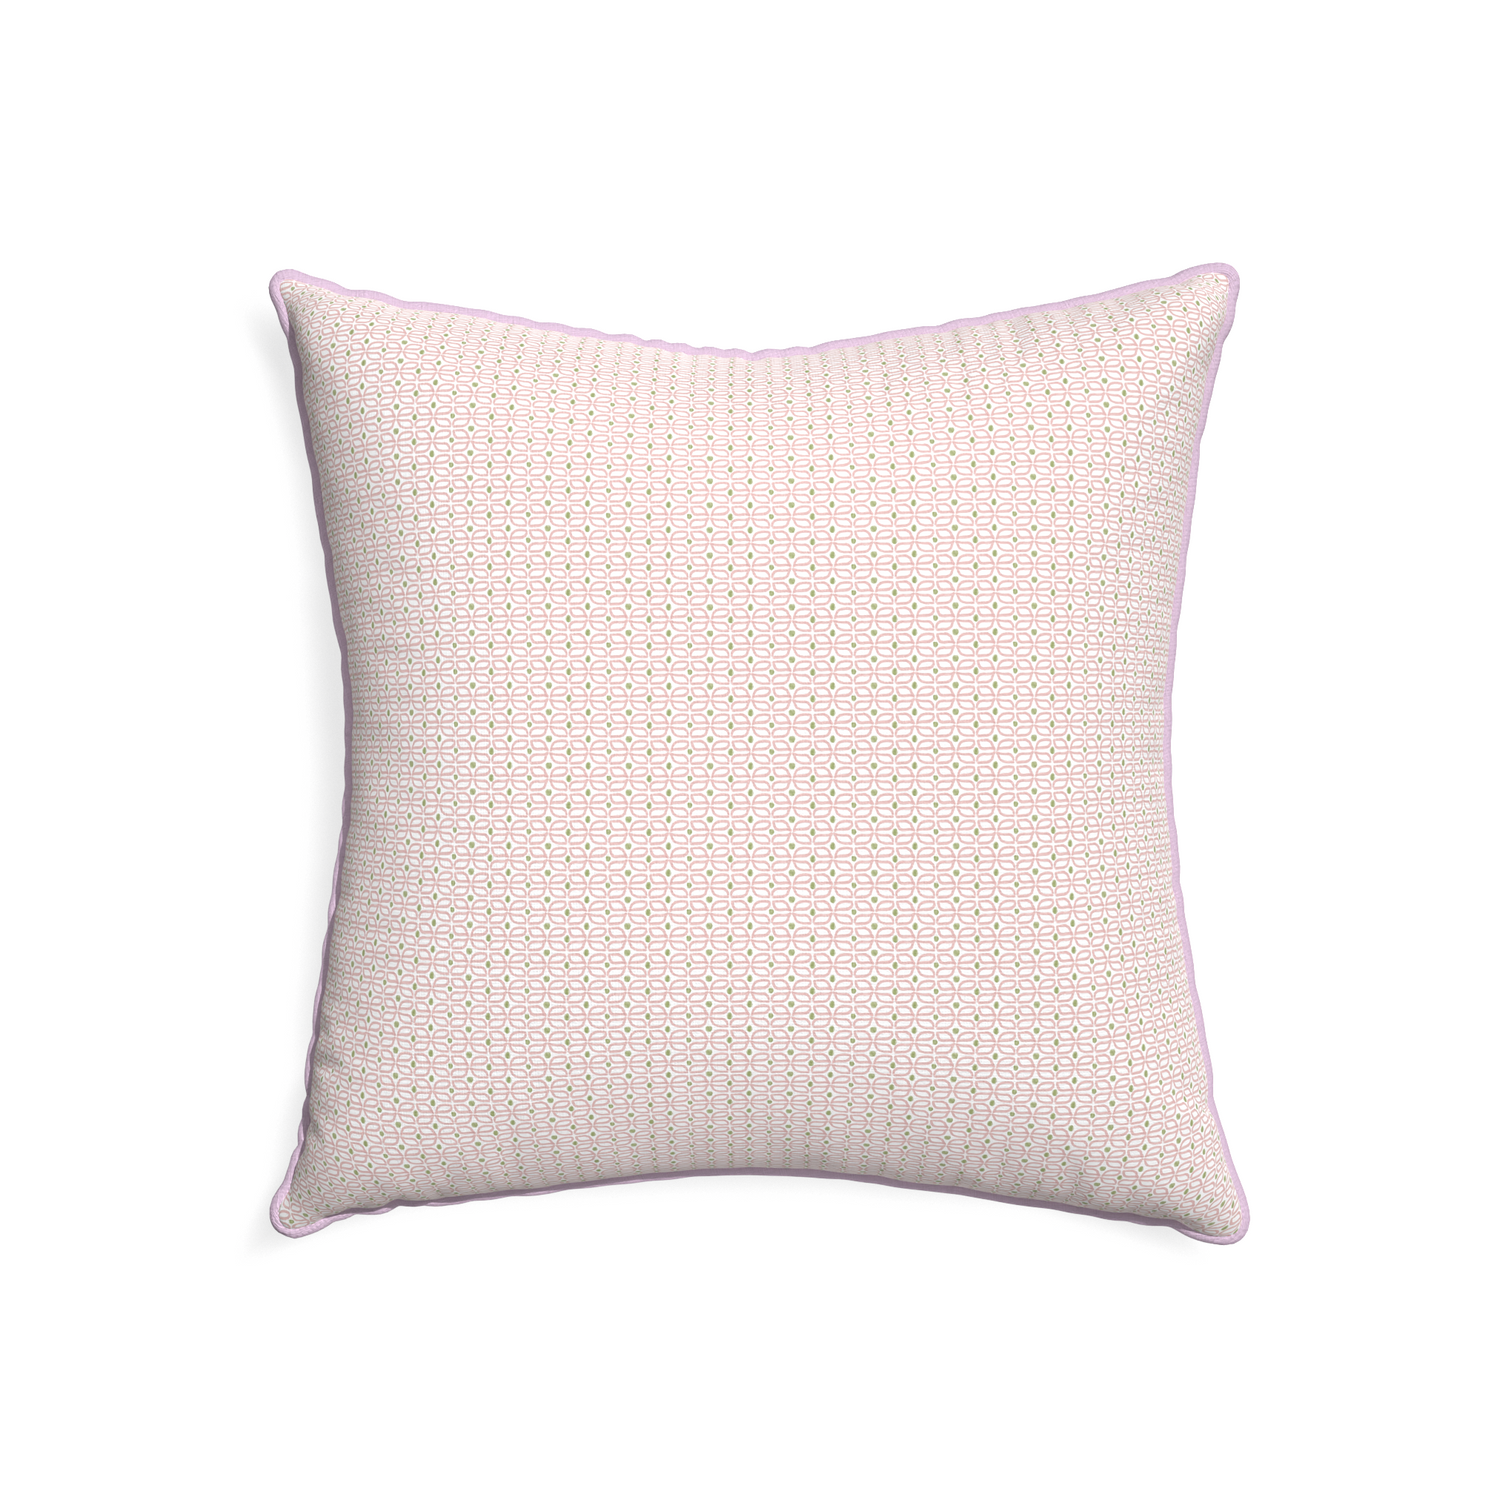 22-square loomi pink custom pillow with l piping on white background